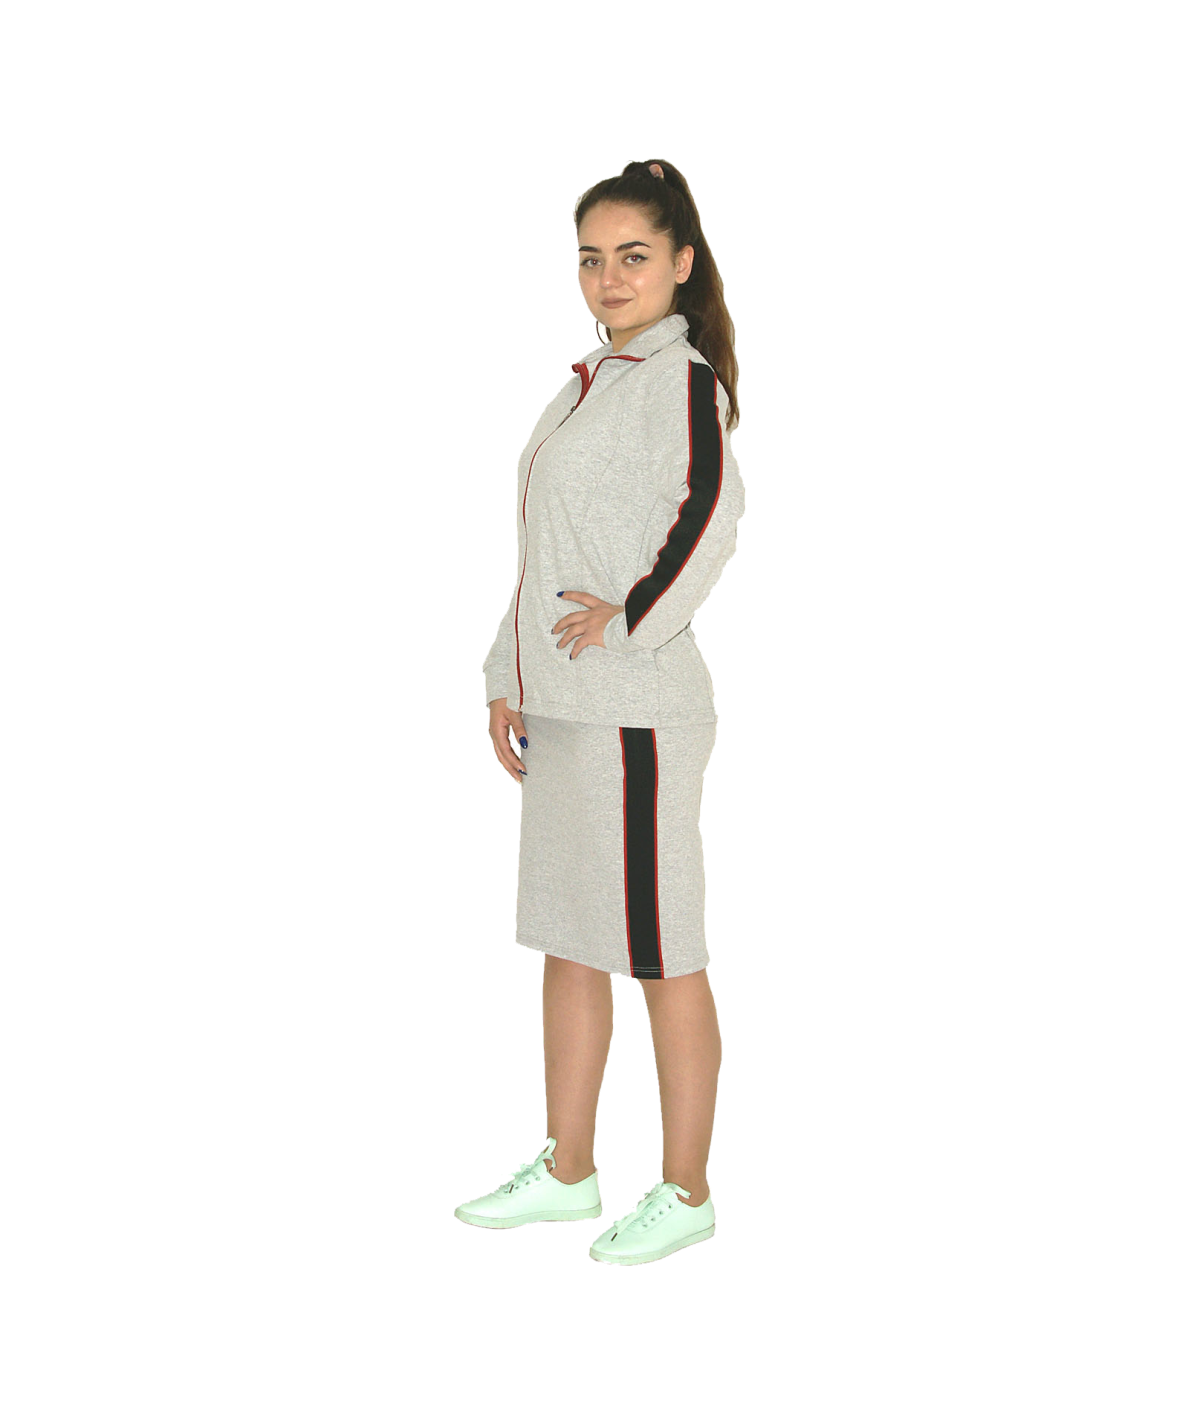 Tracksuit with a skirt